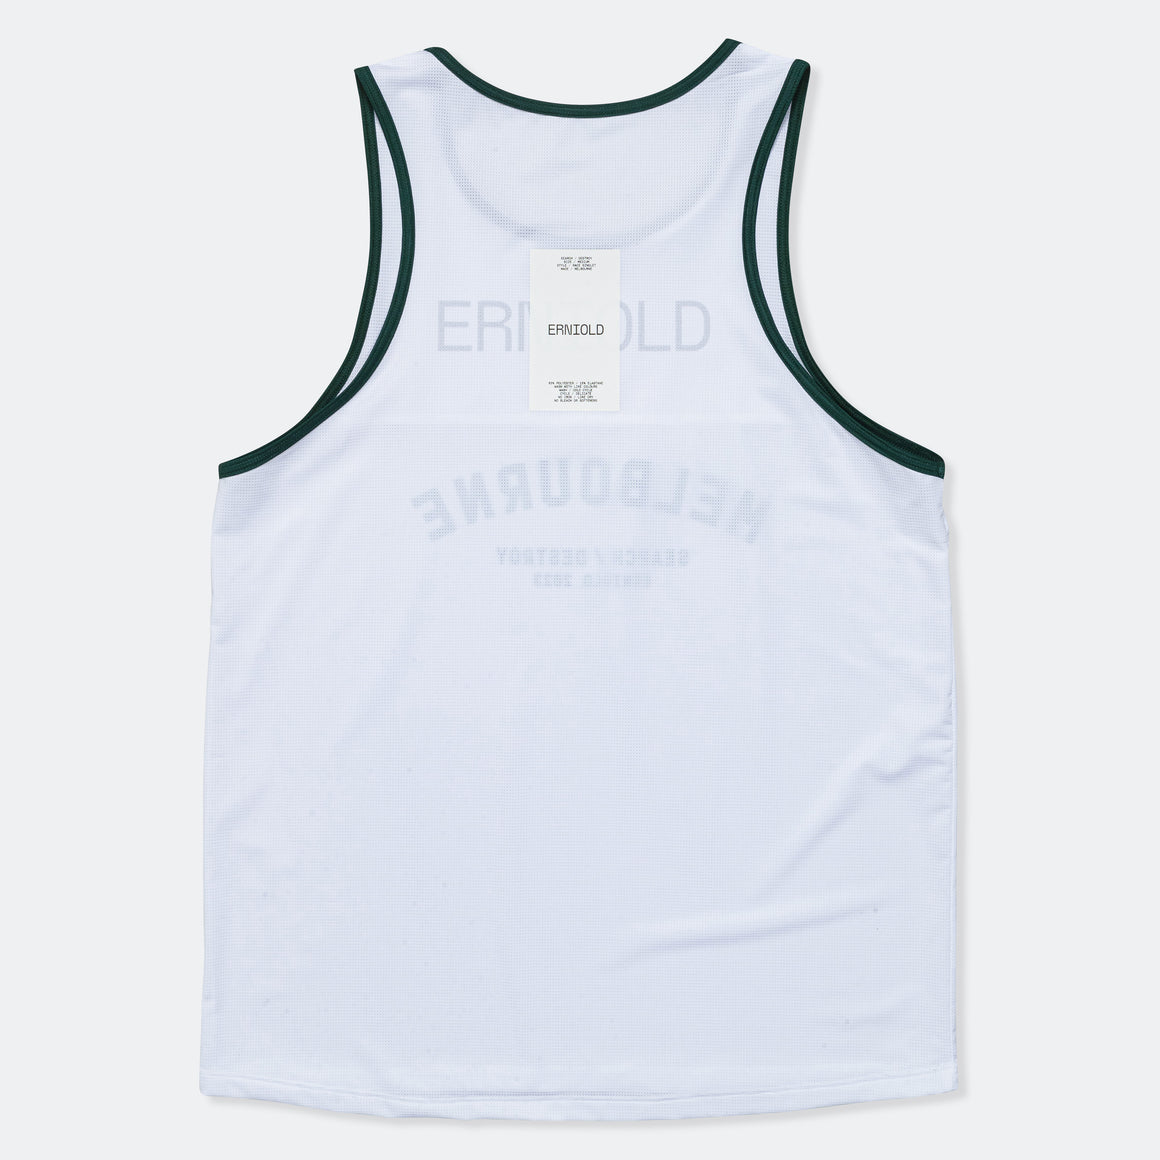 Erniold - Mens Melbourne Race Singlet - White - Up There Athletics